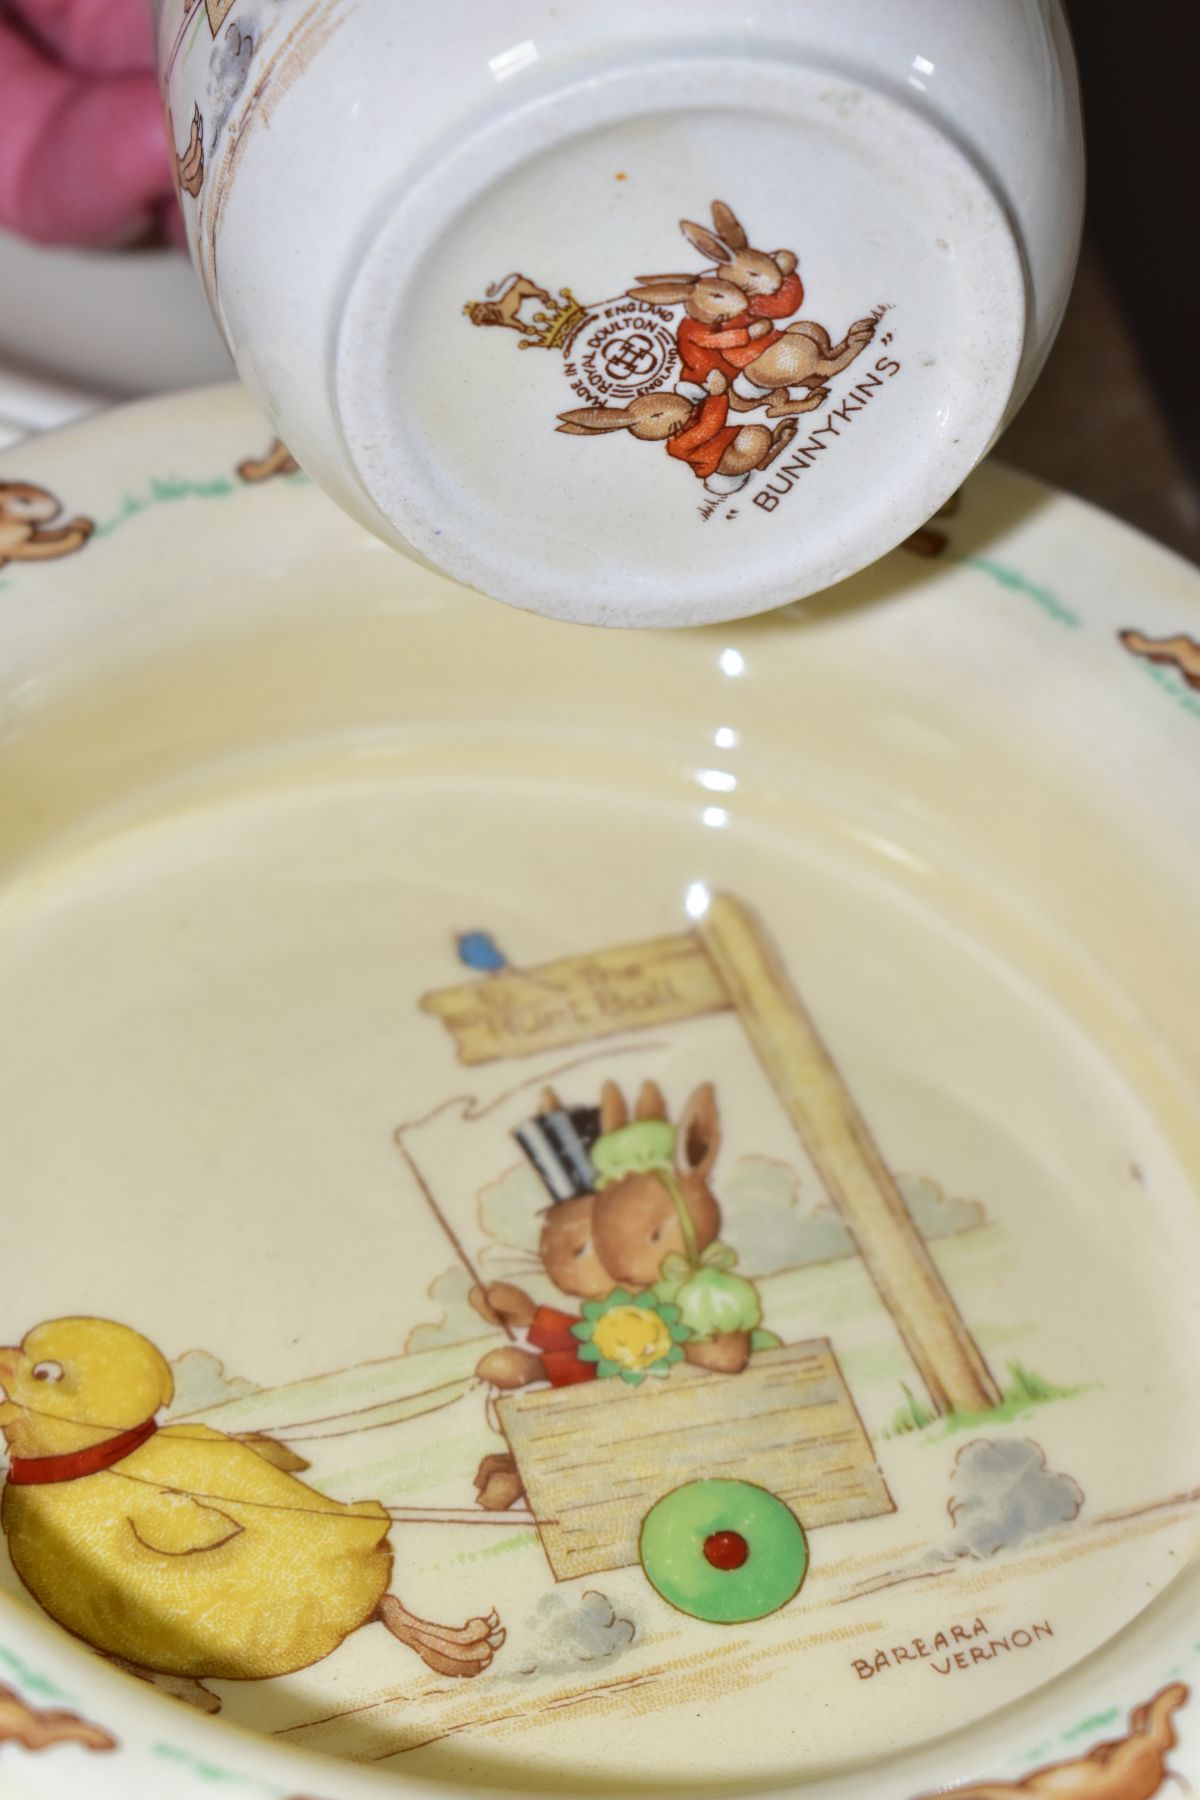 SIX PIECES OF ROYAL DOULTON BUNNYKINS EARTHENWARE TABLES WARES OF CHICKEN PULLING CART, DESIGNED - Image 7 of 10